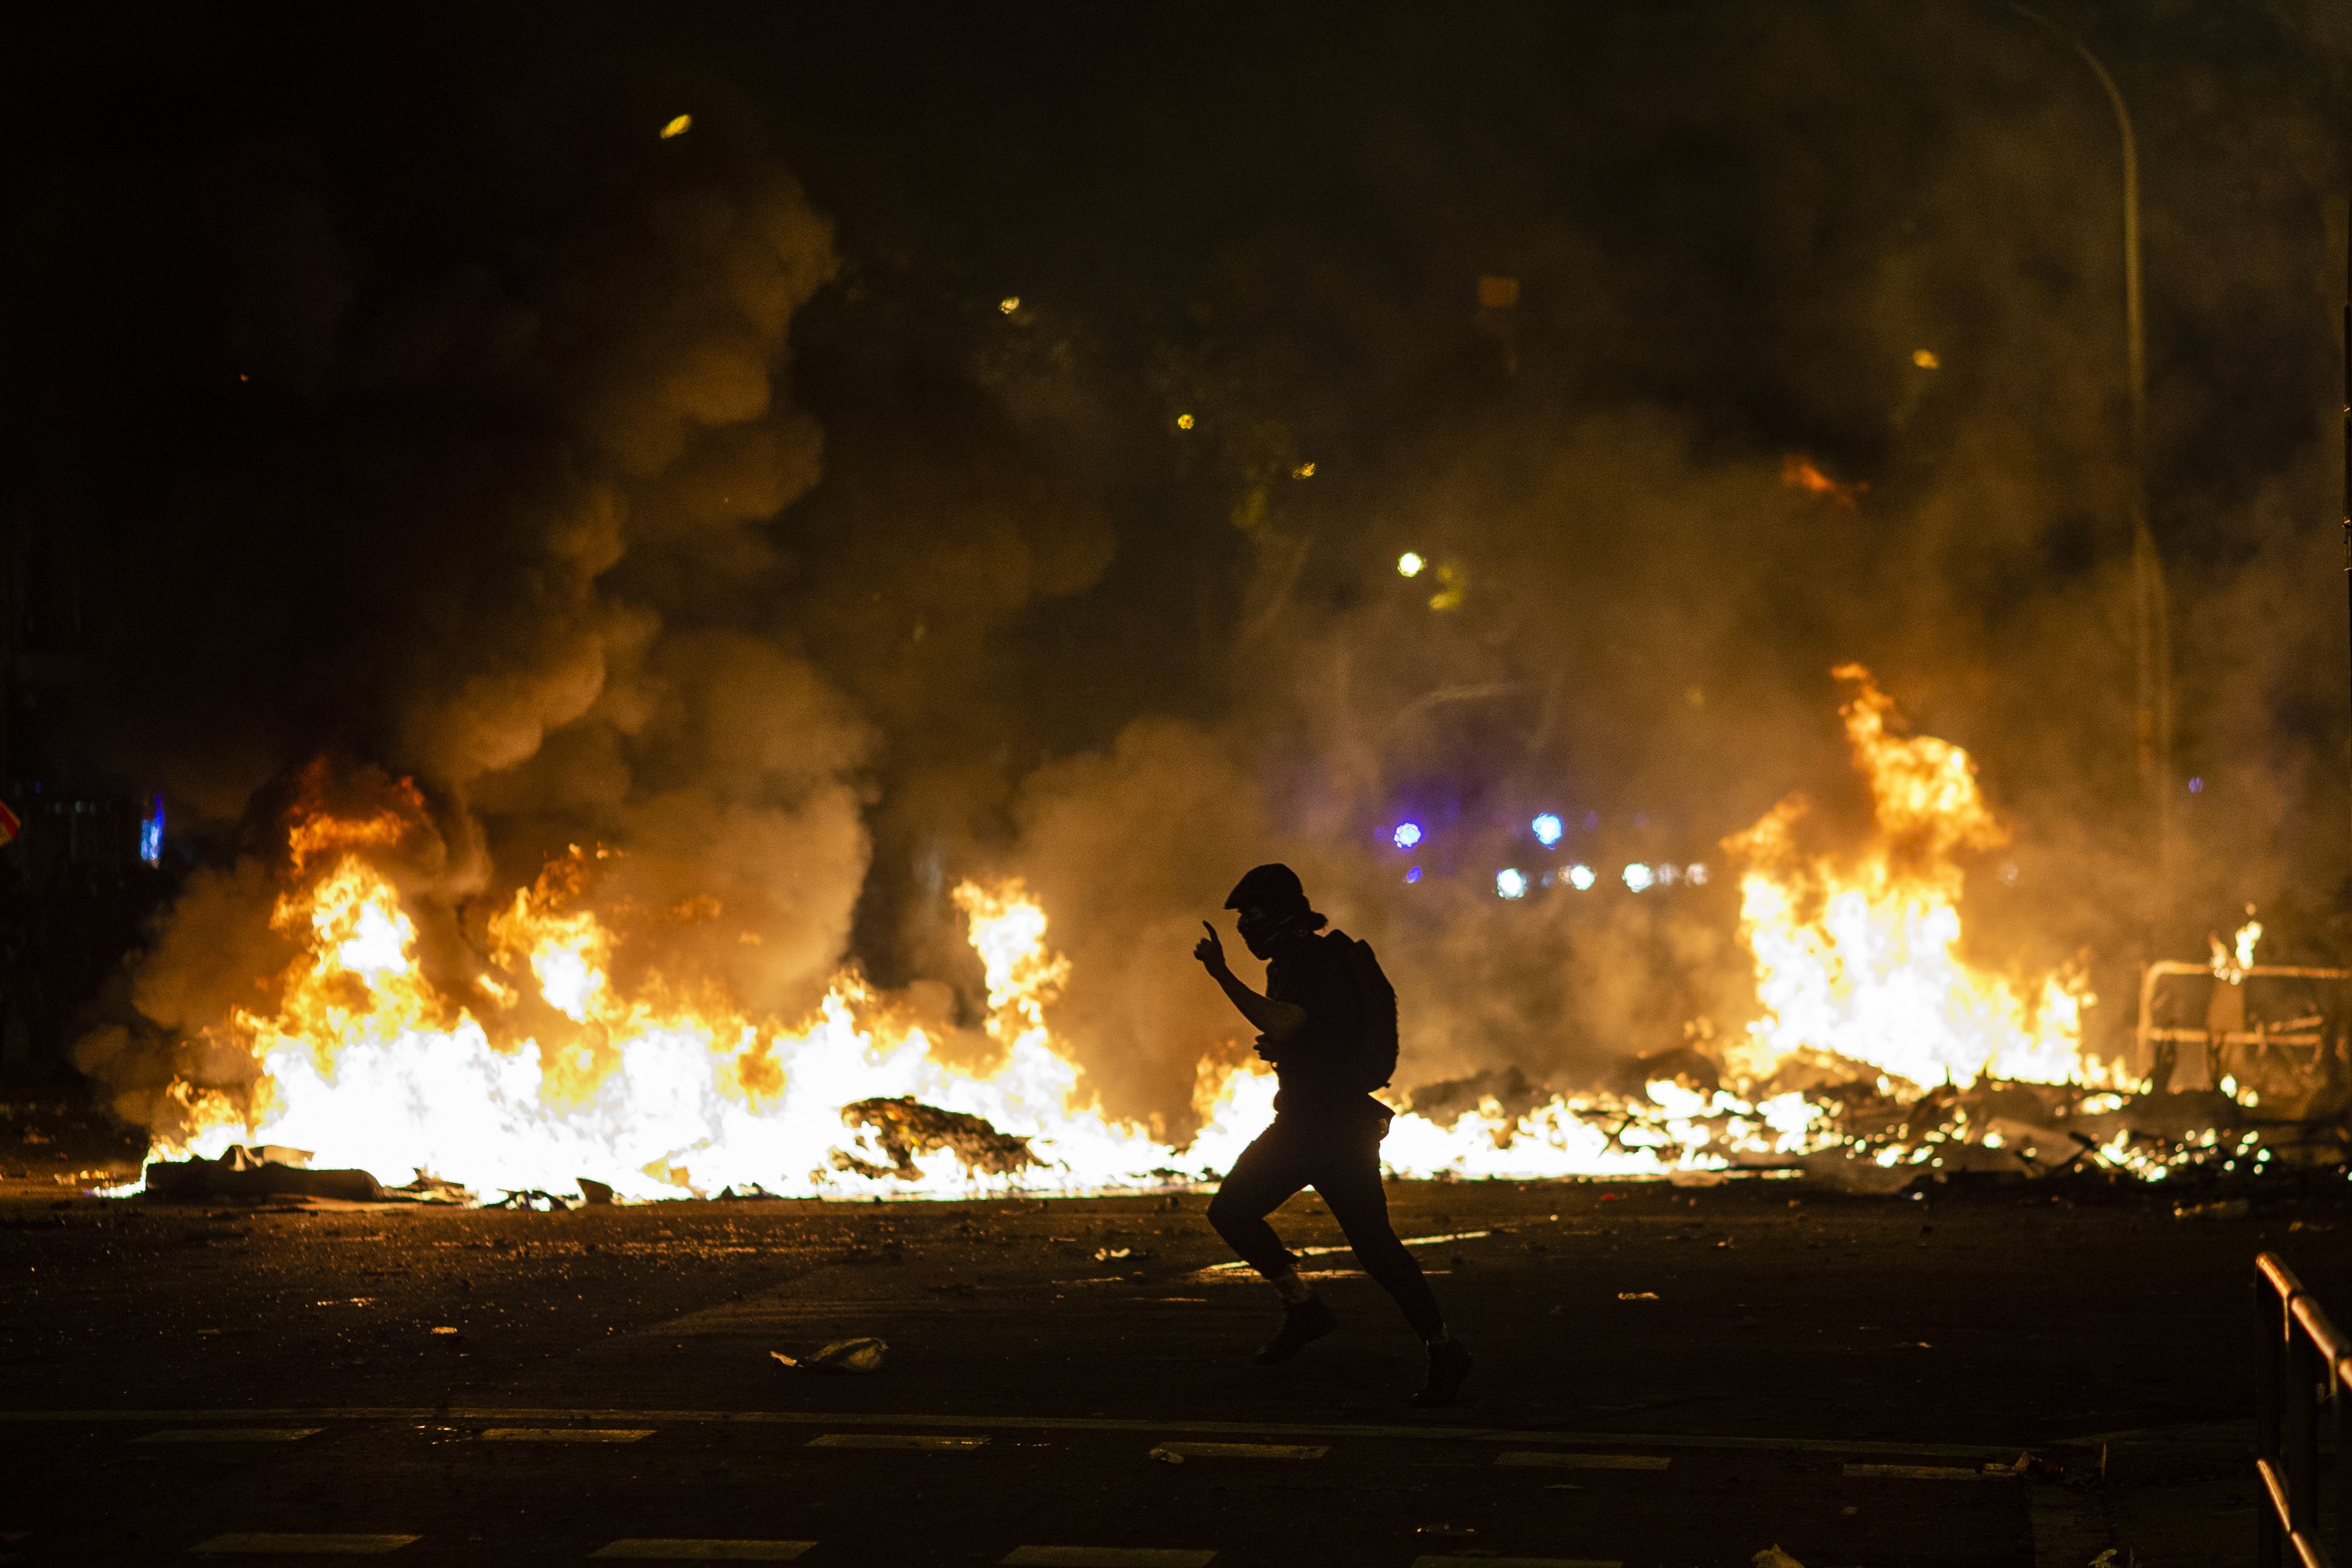 In this image, one person walks next to a line of fire in the street at night